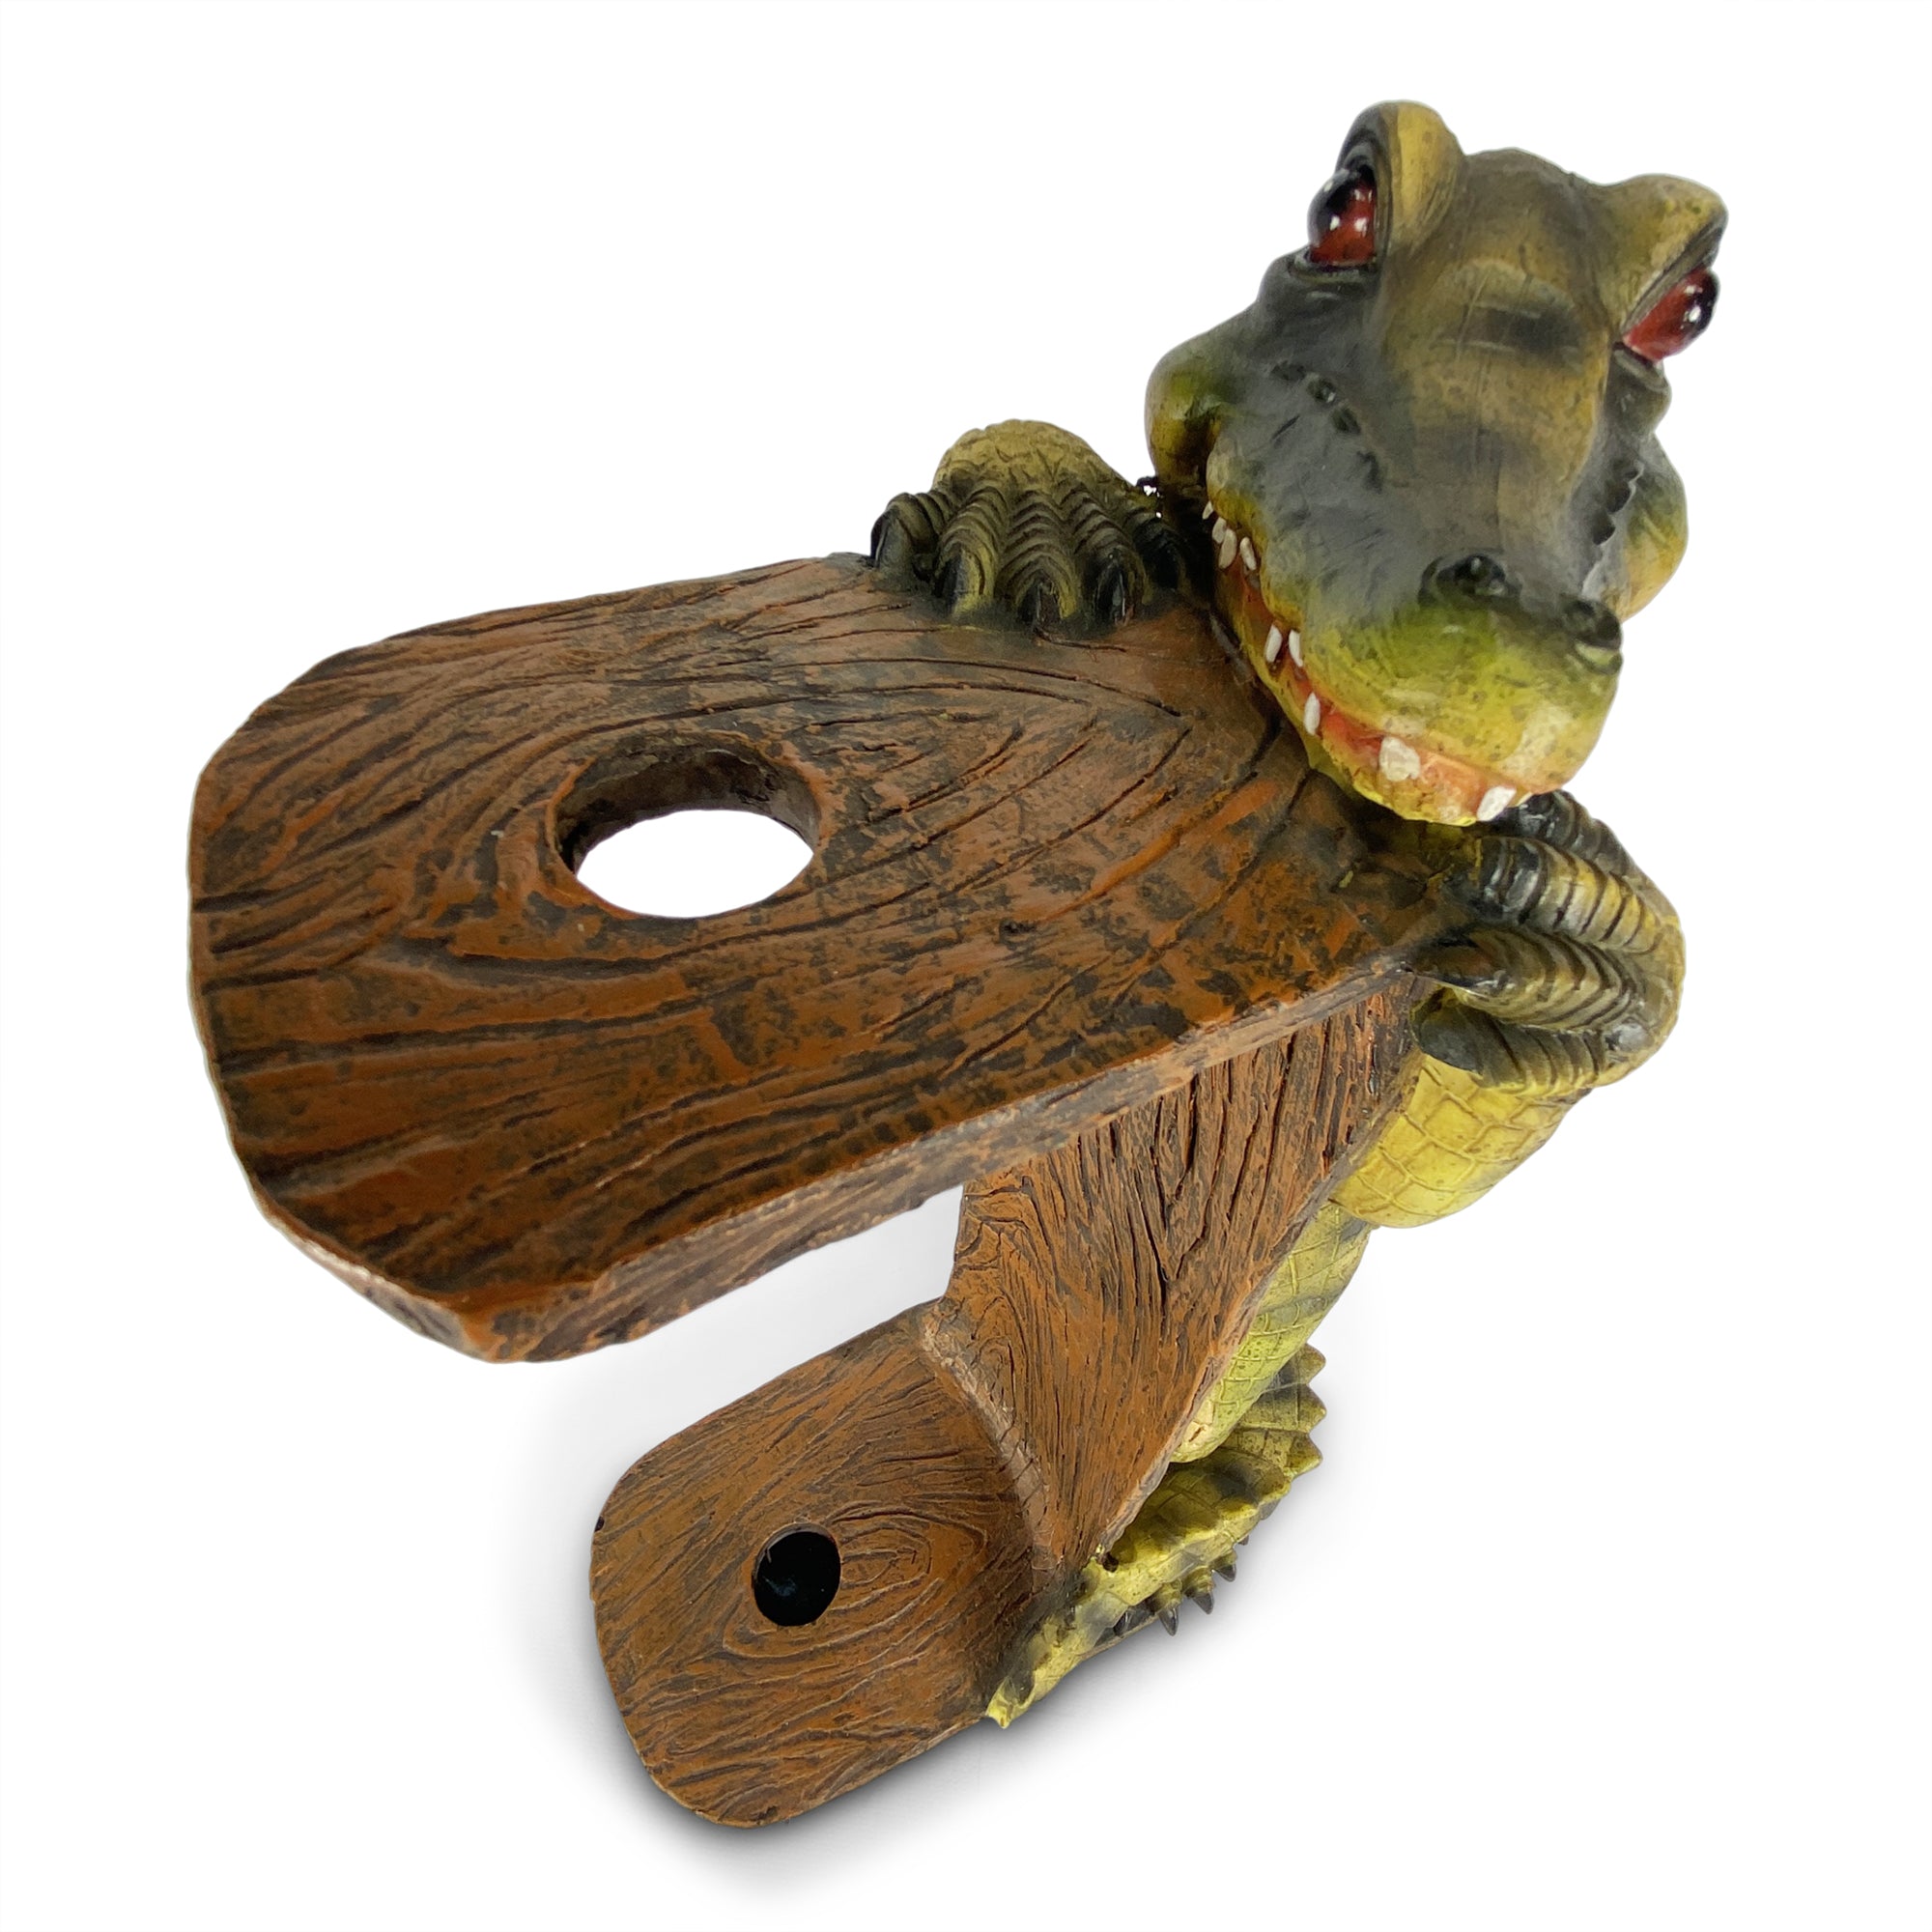 Rivers Edge Products Countertop Paper Towel Holder, Unique Resin and Wood  Paper Towel Holder, Novelty Napkin Roll Holder for Counter, Giftable Animal